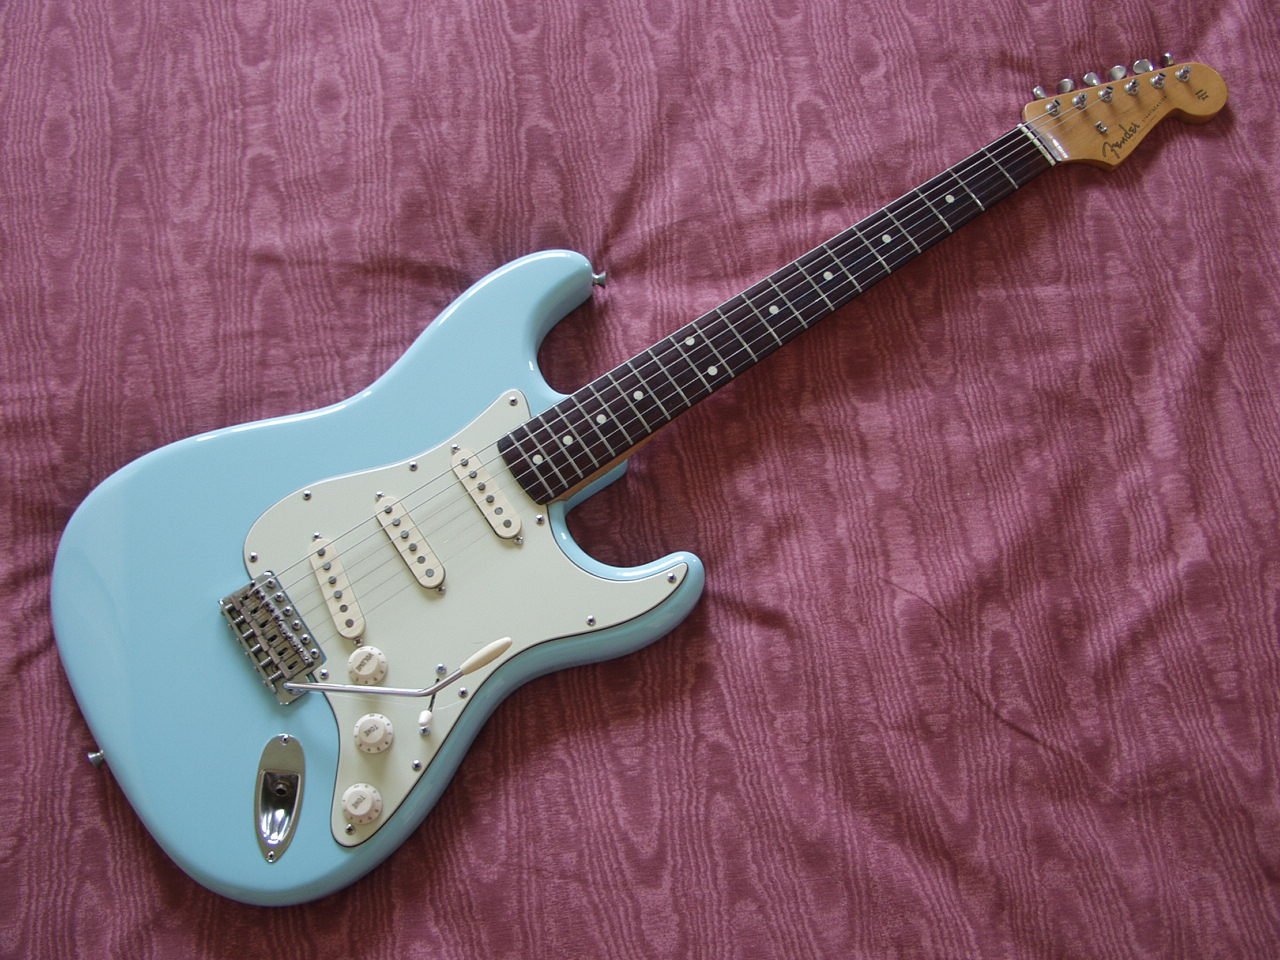 Lets look at our guitars thread. - Page 15 - Music - PistonHeads